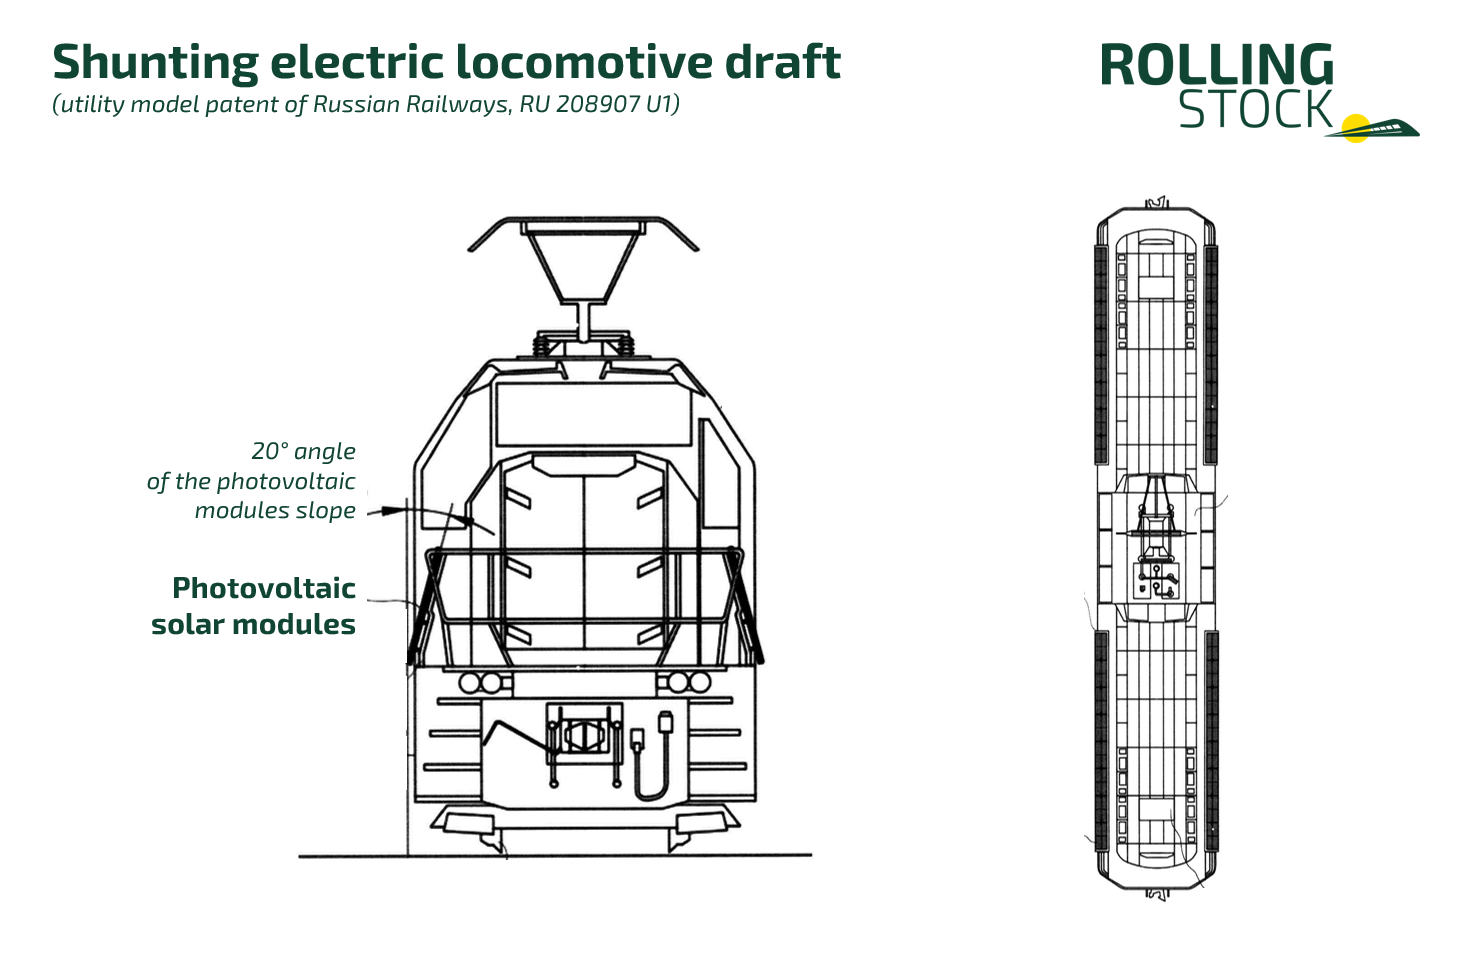 Drafts of a shunting electric locomotive, front and top view